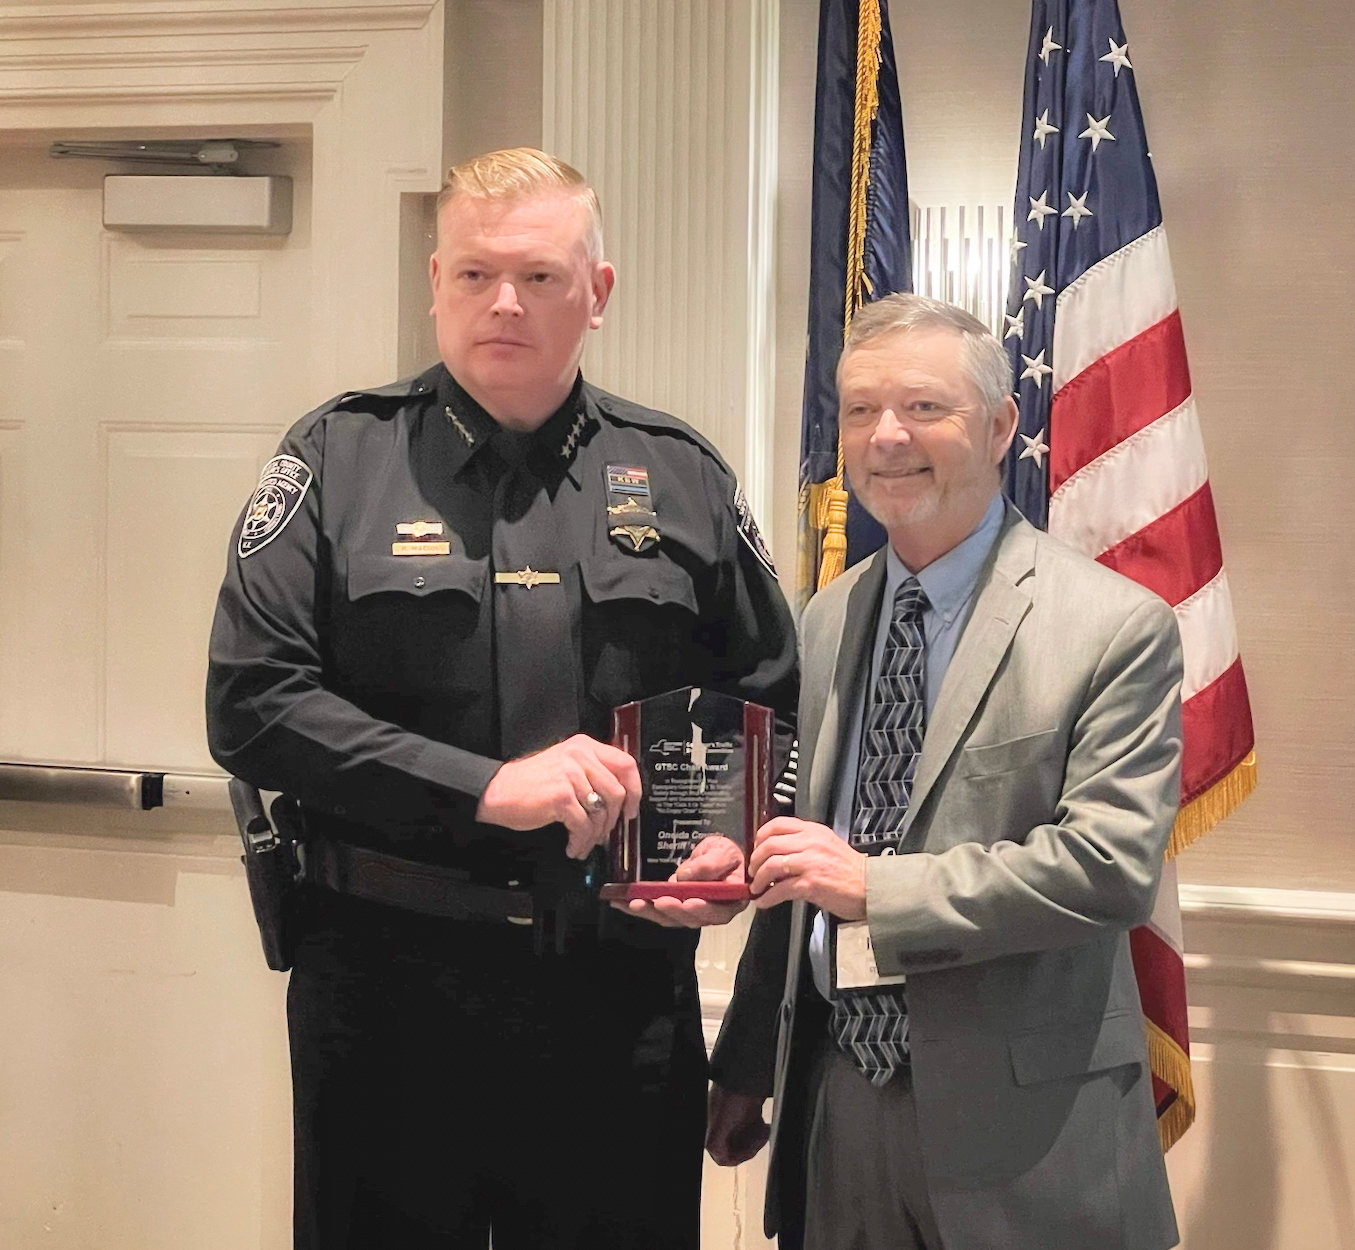 Oneida County Sheriff Robert M. Maciol received the Chair Award from the New York State Governor’s Traffic Safety Committee on Friday.